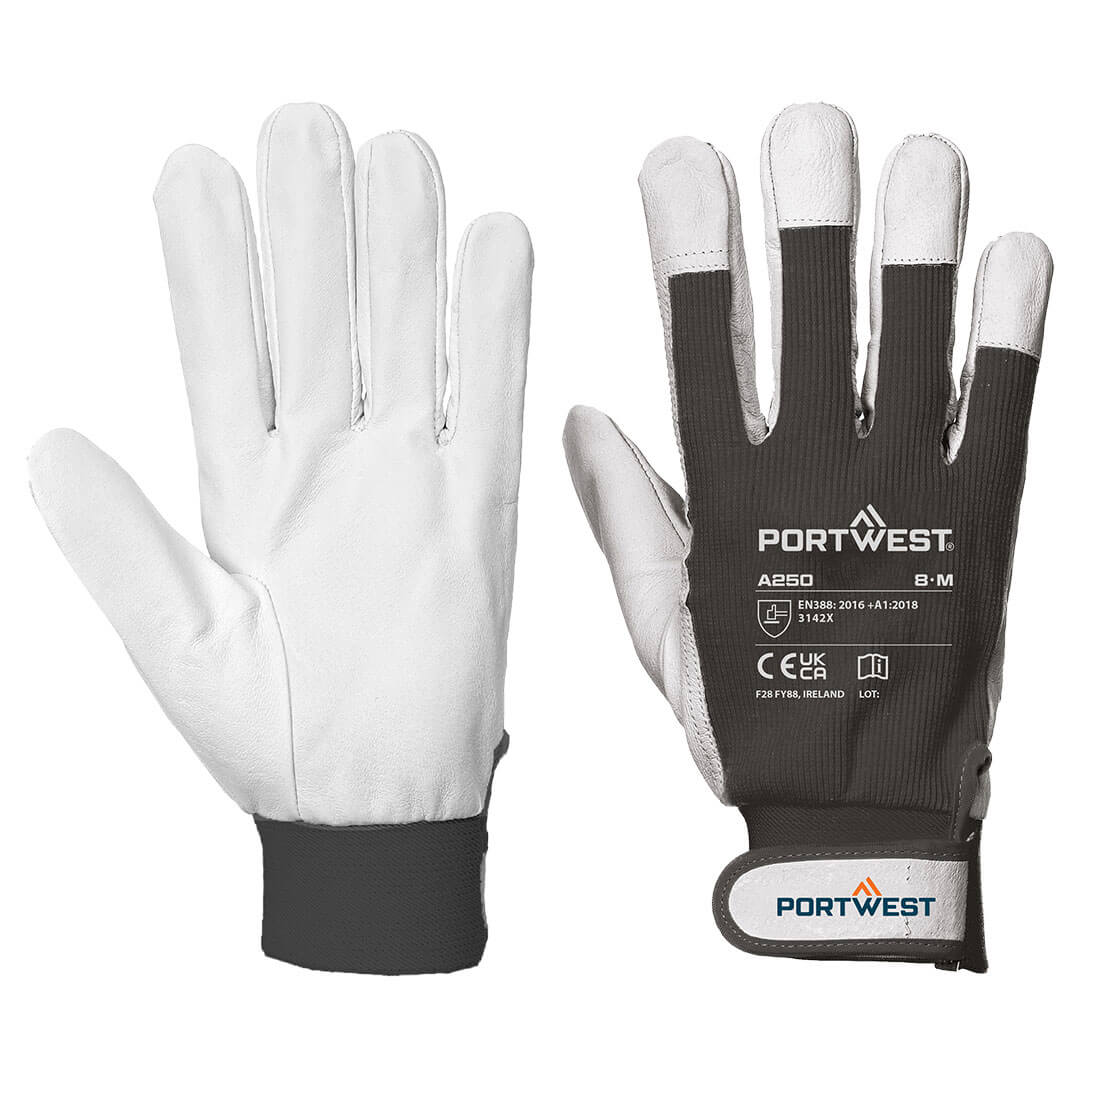 Tergsus Glove Re-usable Gloves A250